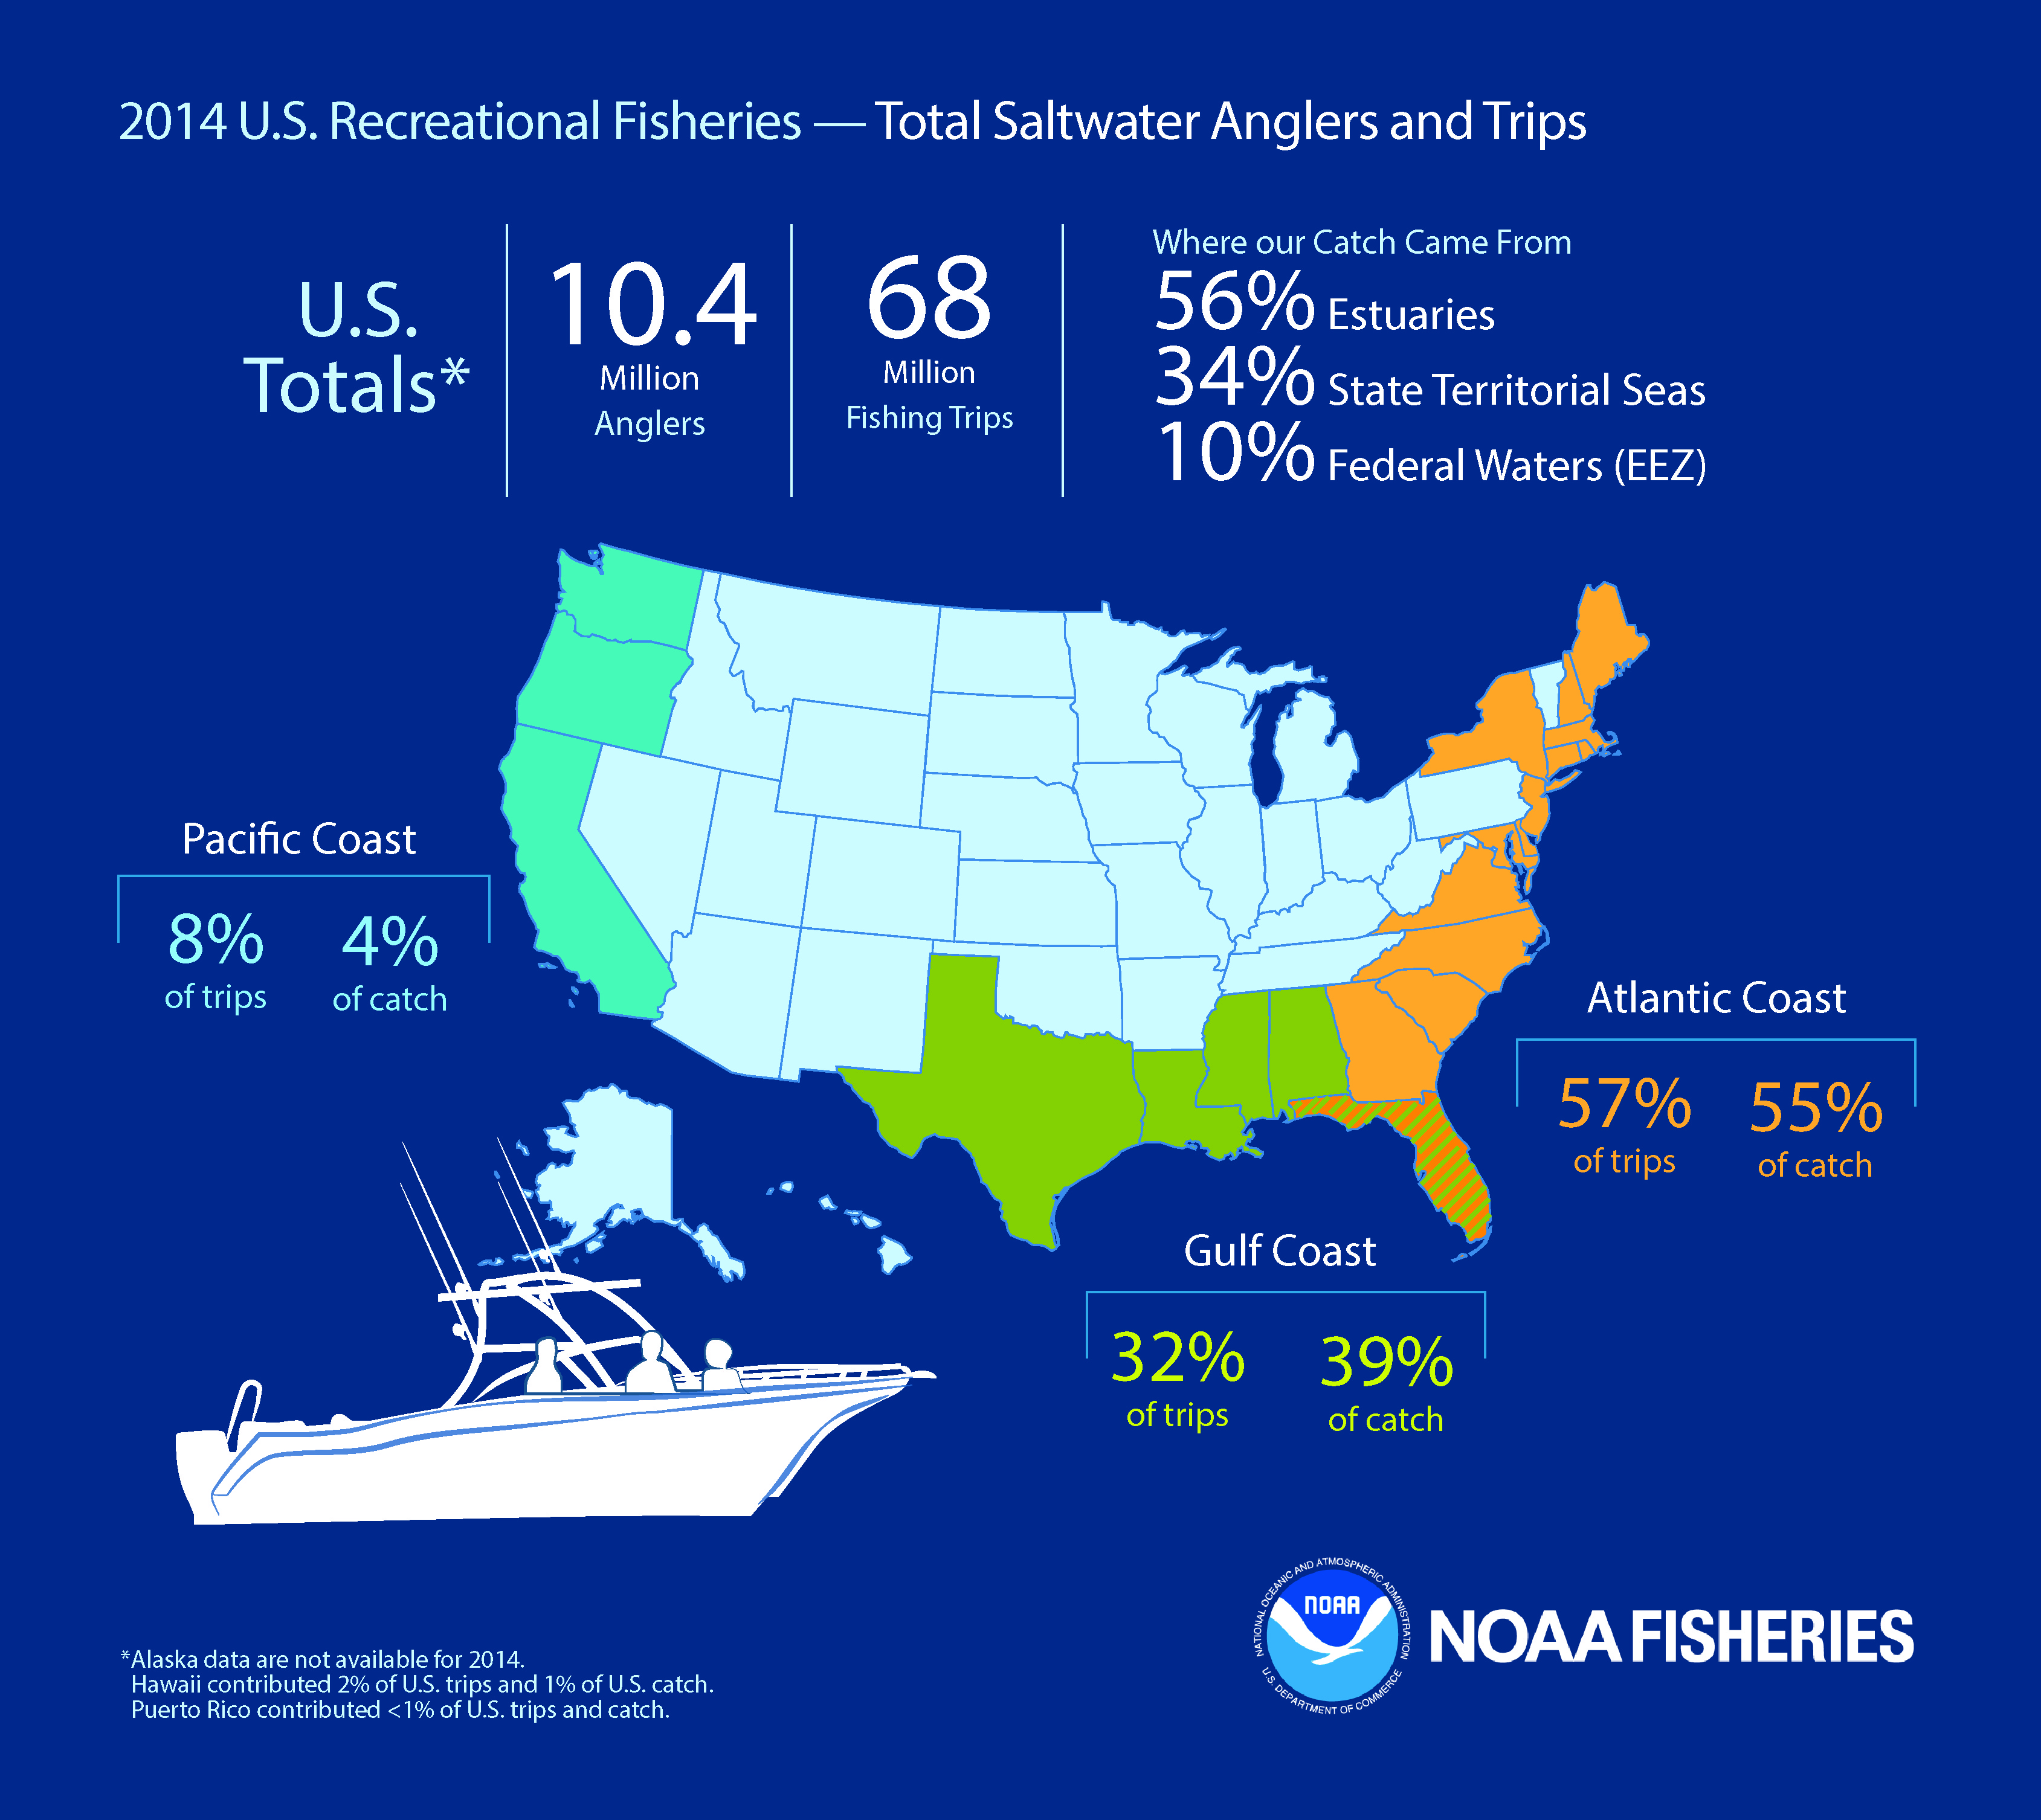 2014 U.S. Recreational Fisheries - Total Saltwater Anglers and Trips.